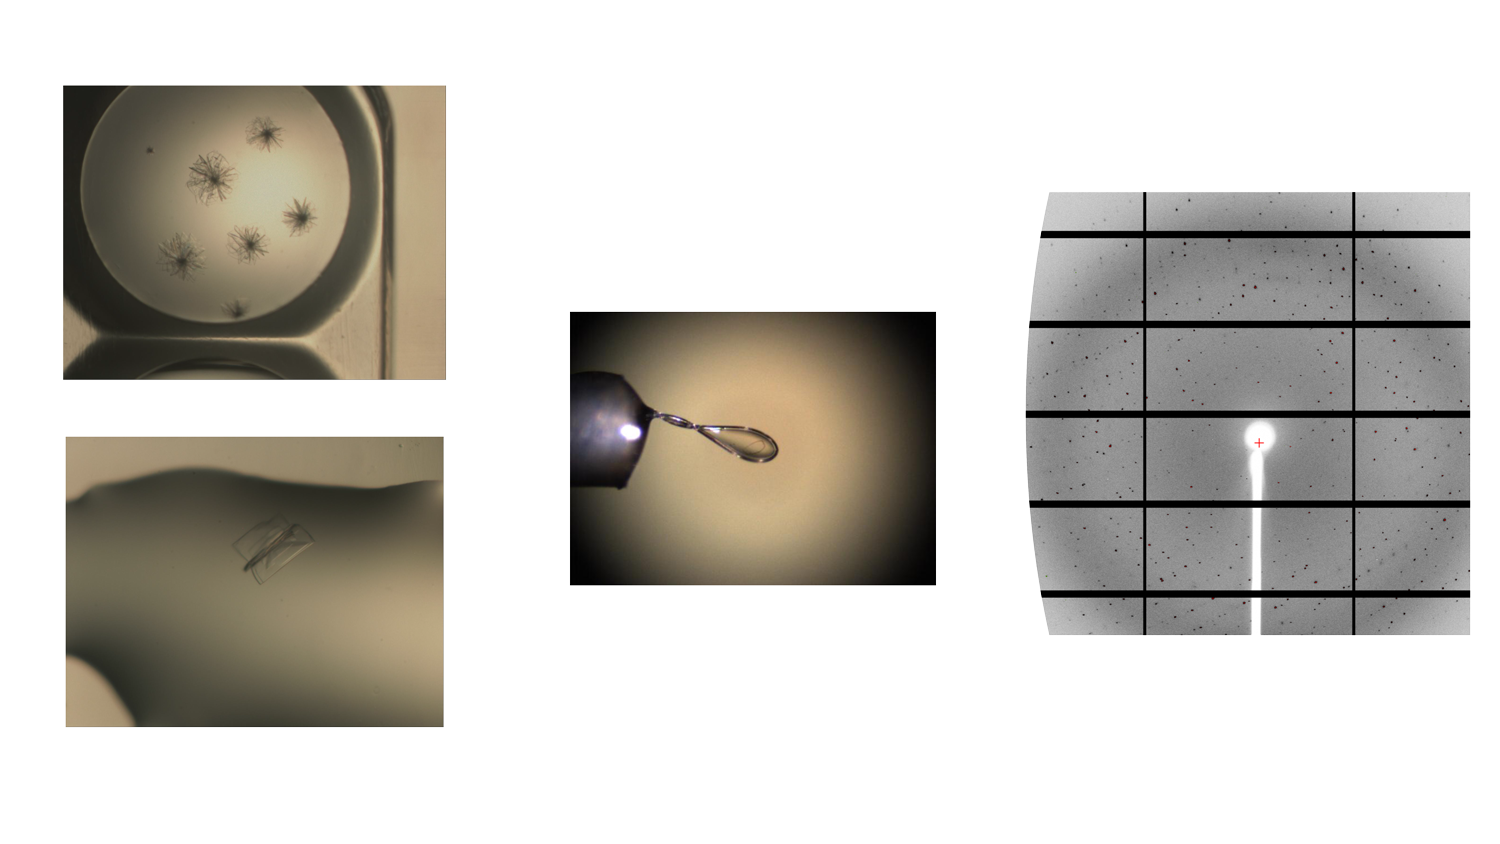 Mpro crystals and diffraction patterns